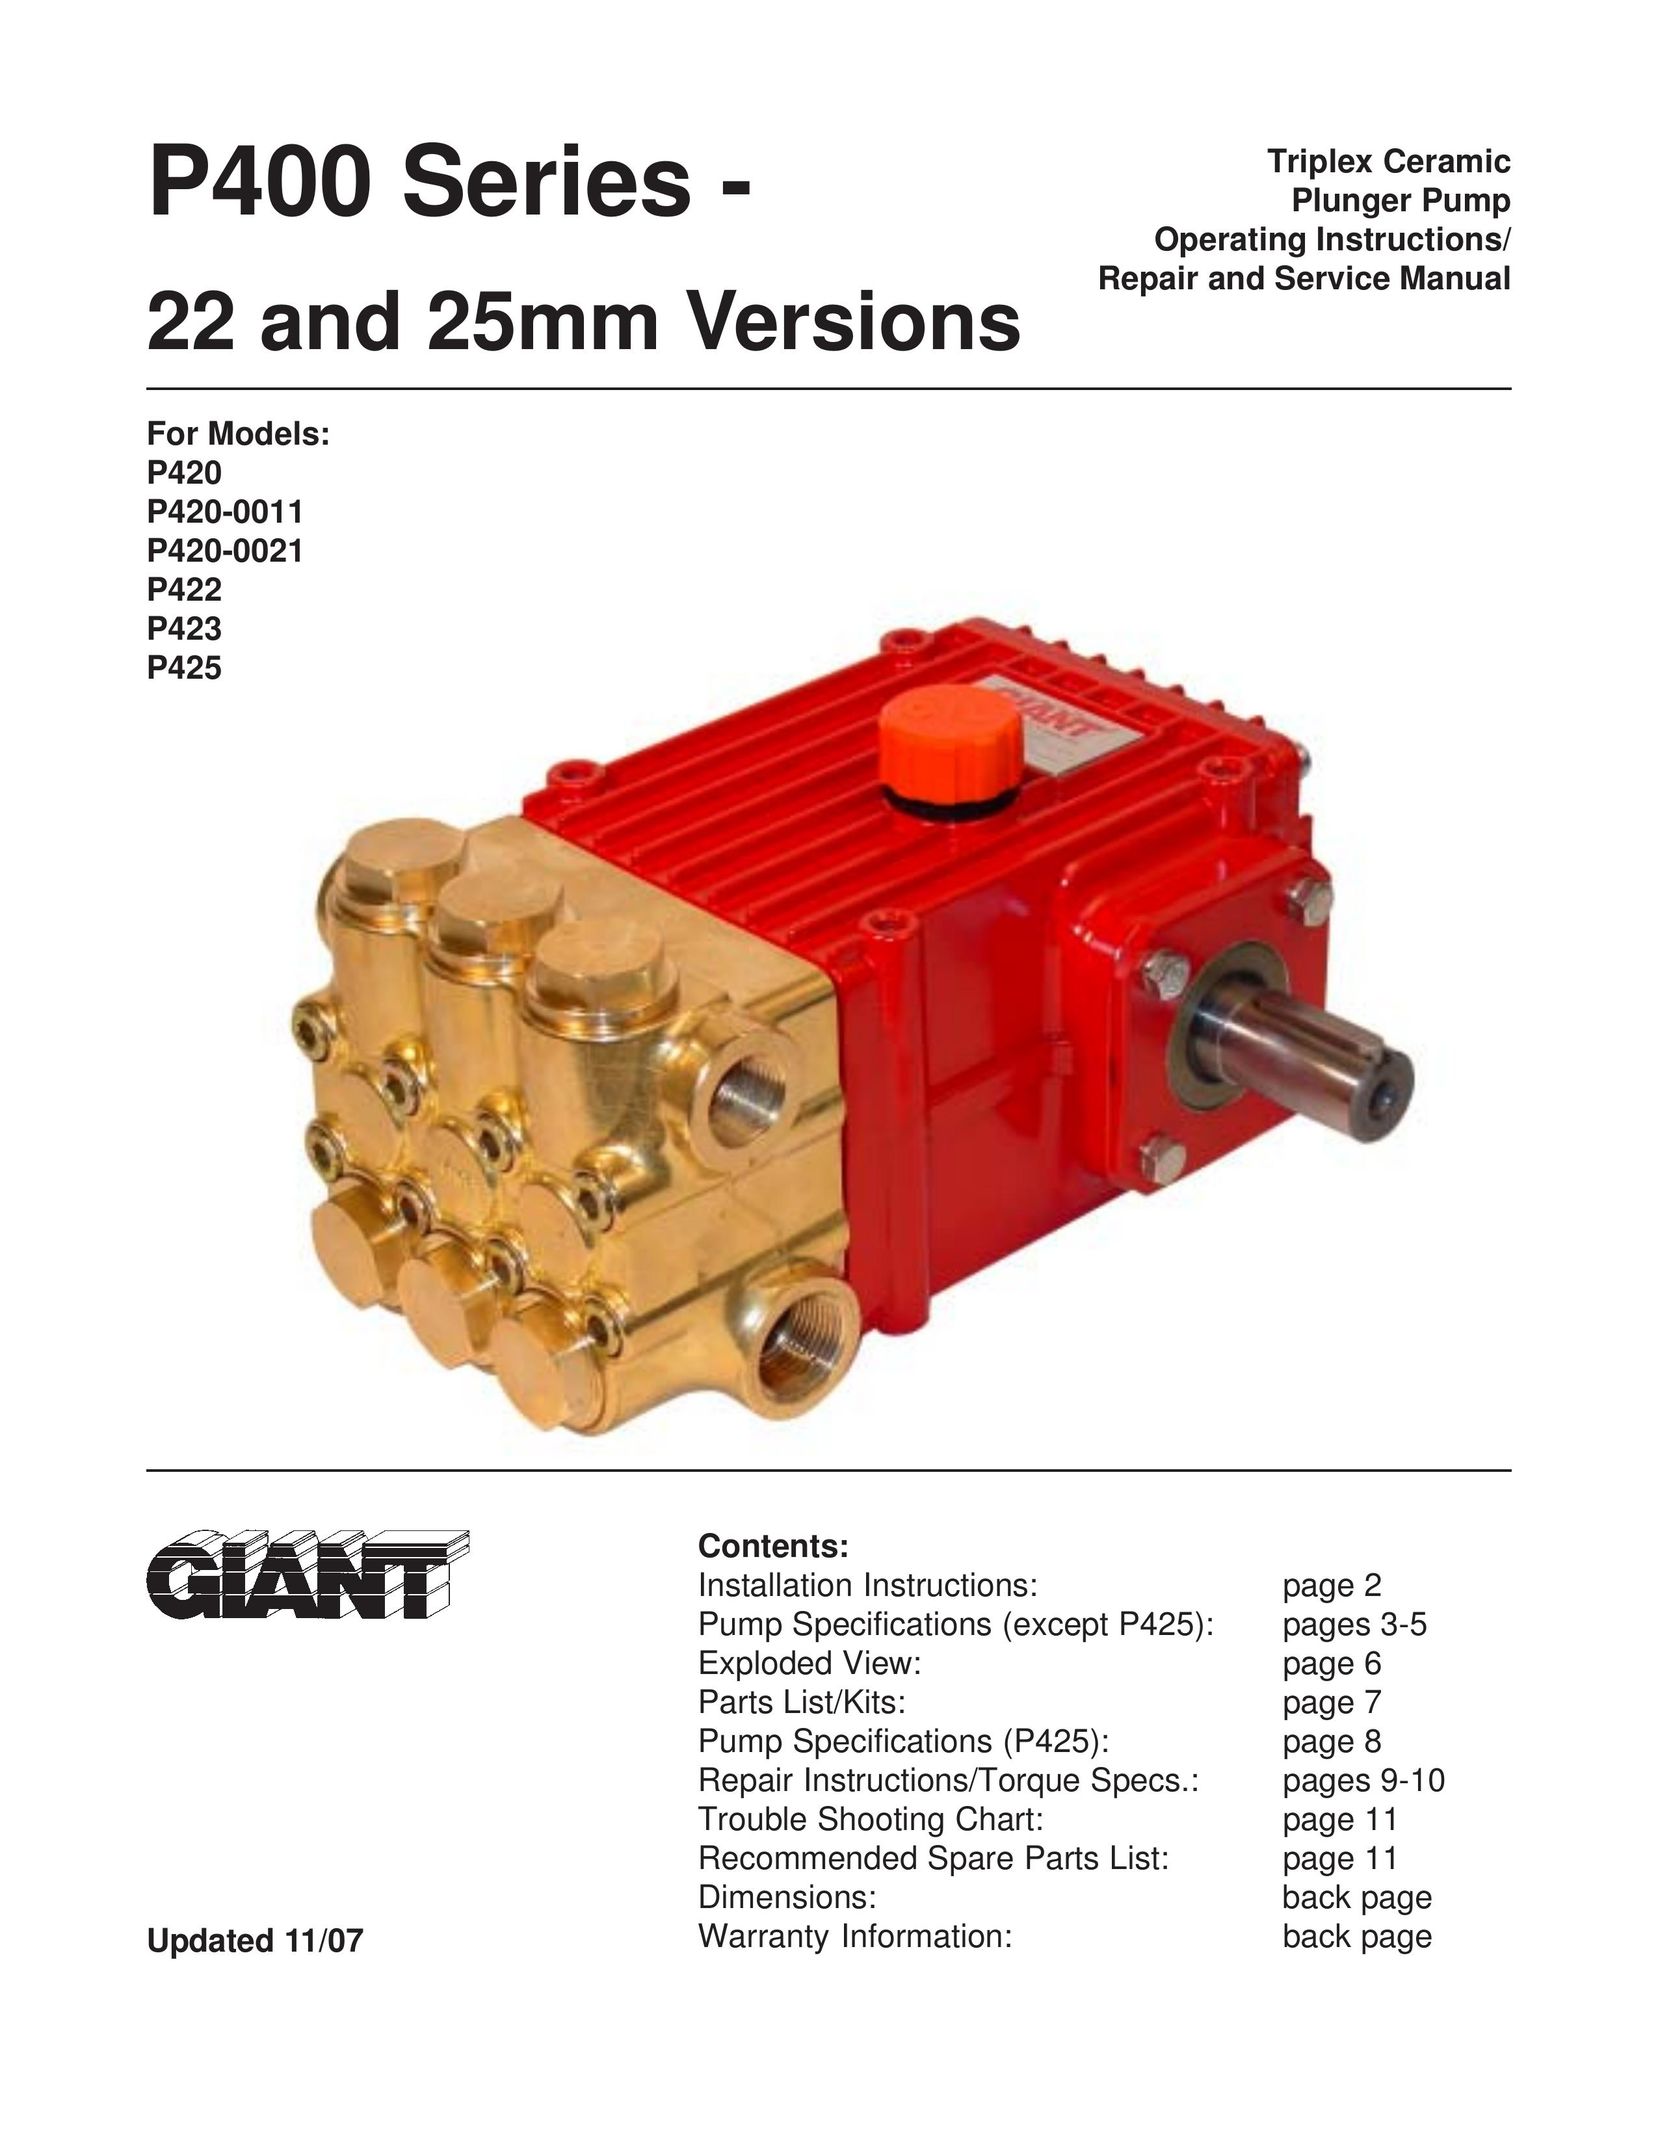 Giant P423 Septic System User Manual